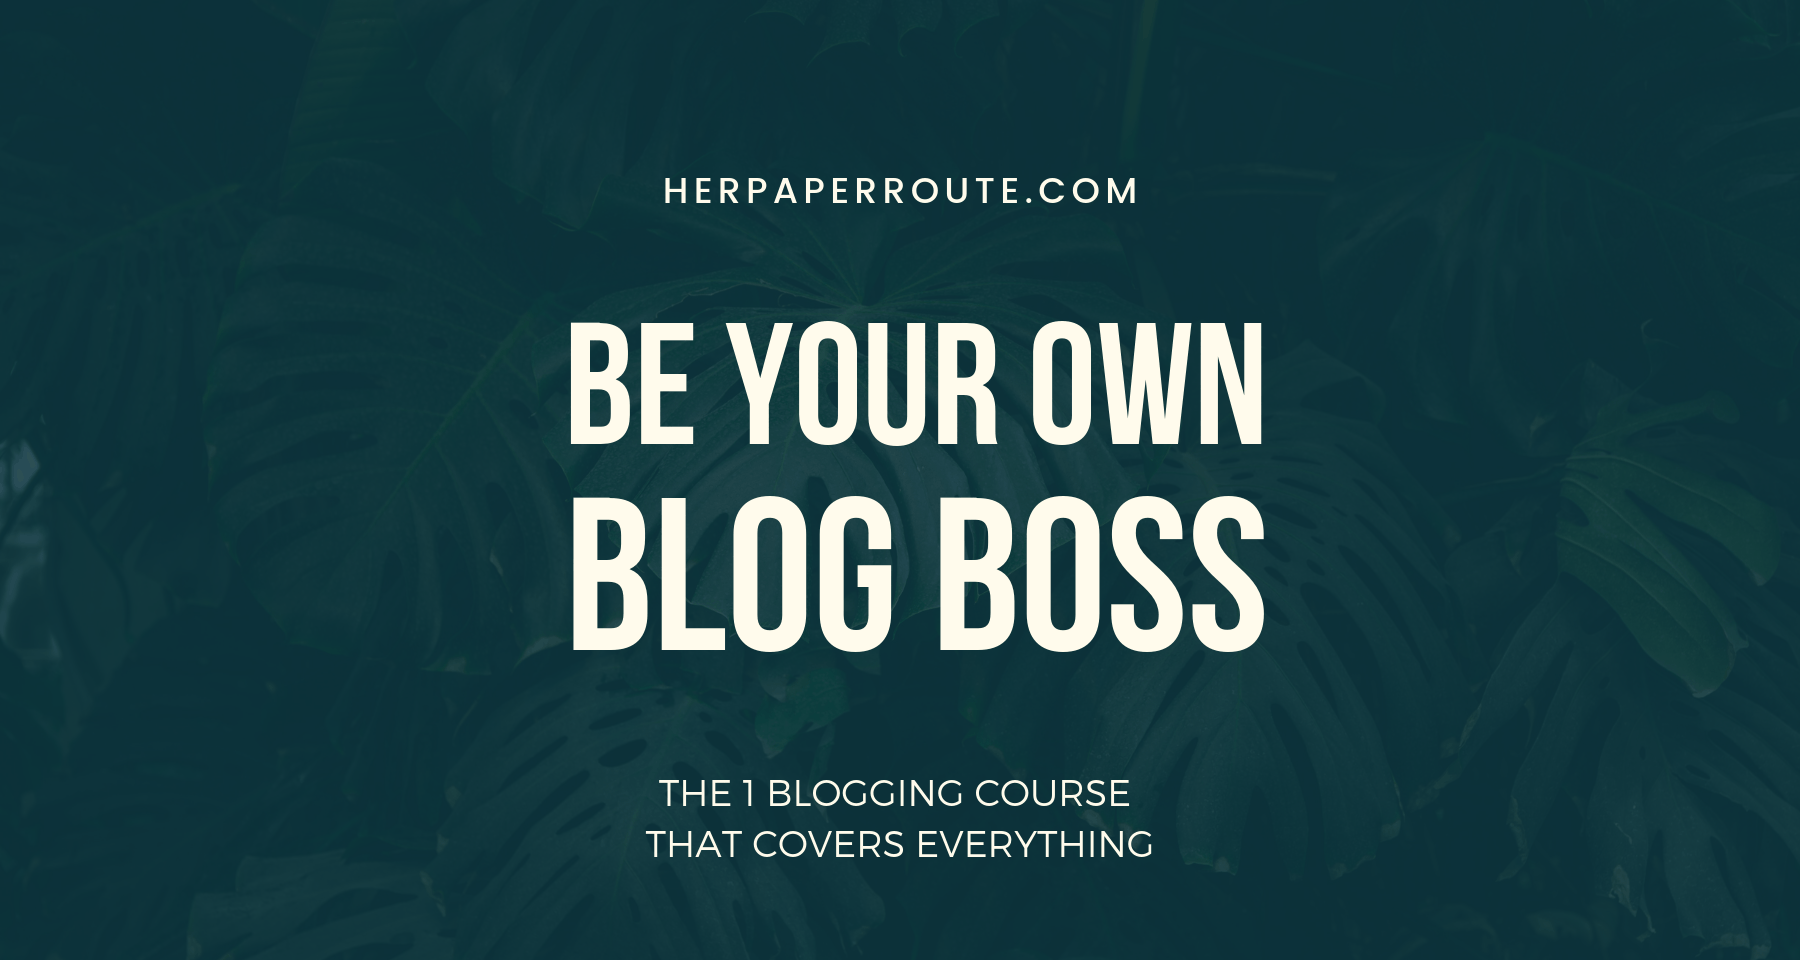 Make Money Blogging Course Be Your Own Blog Boss - 